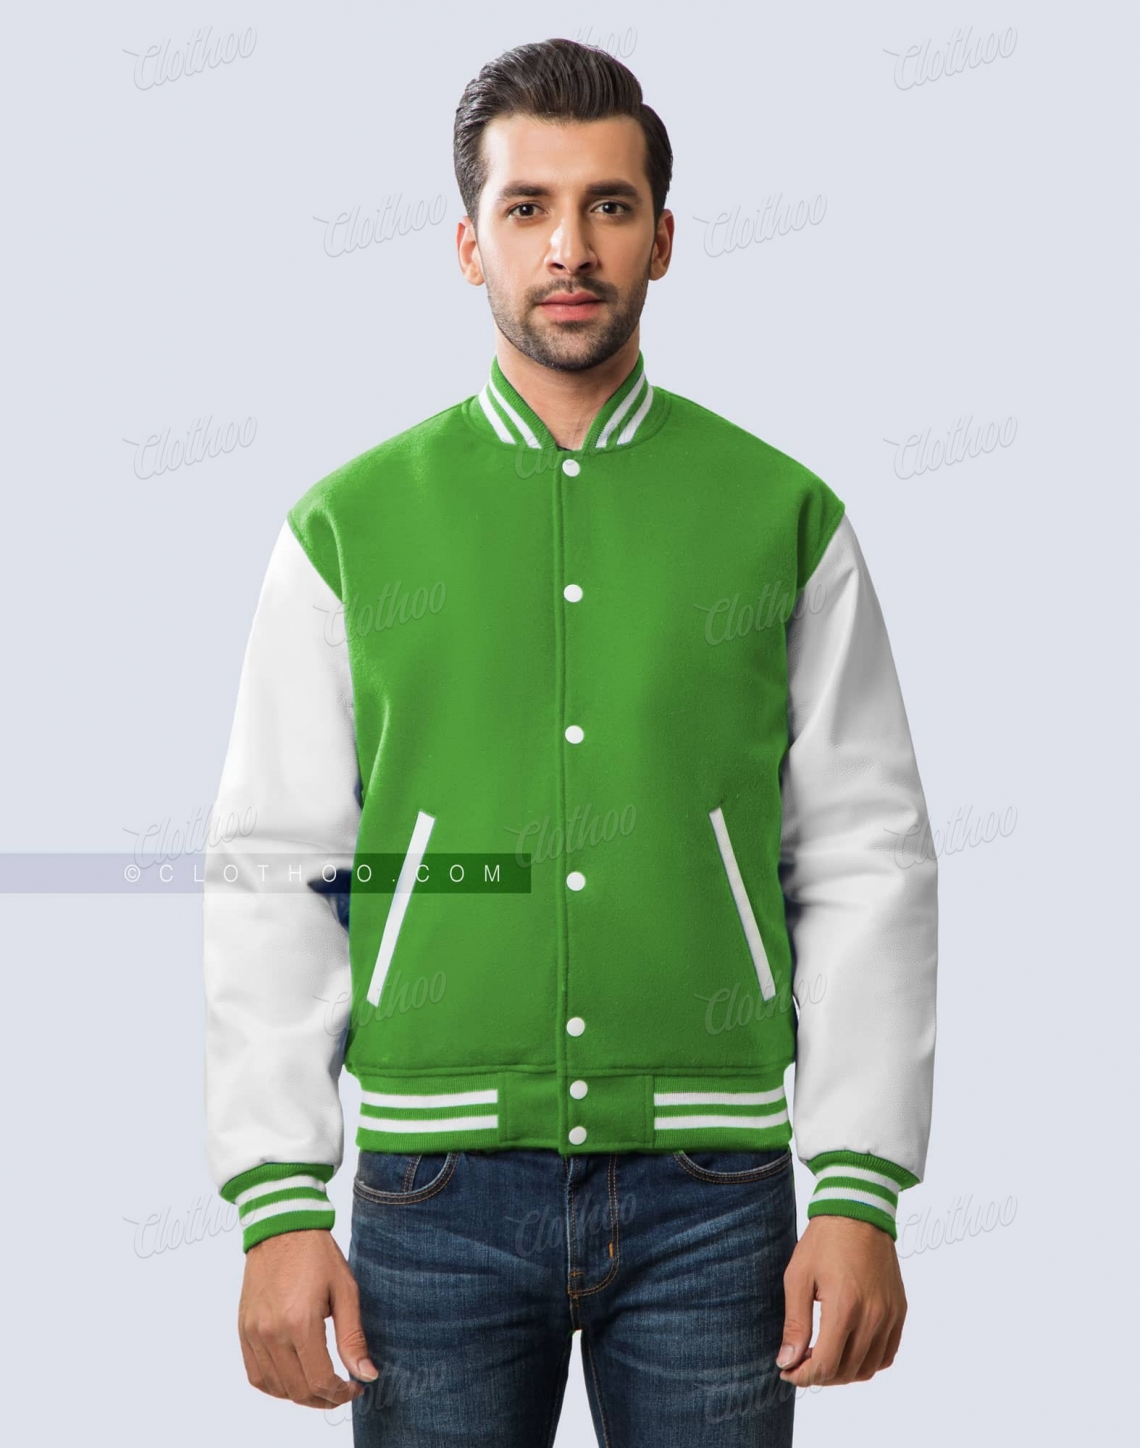 Kelly green varsity jacket with white leather sleeves front